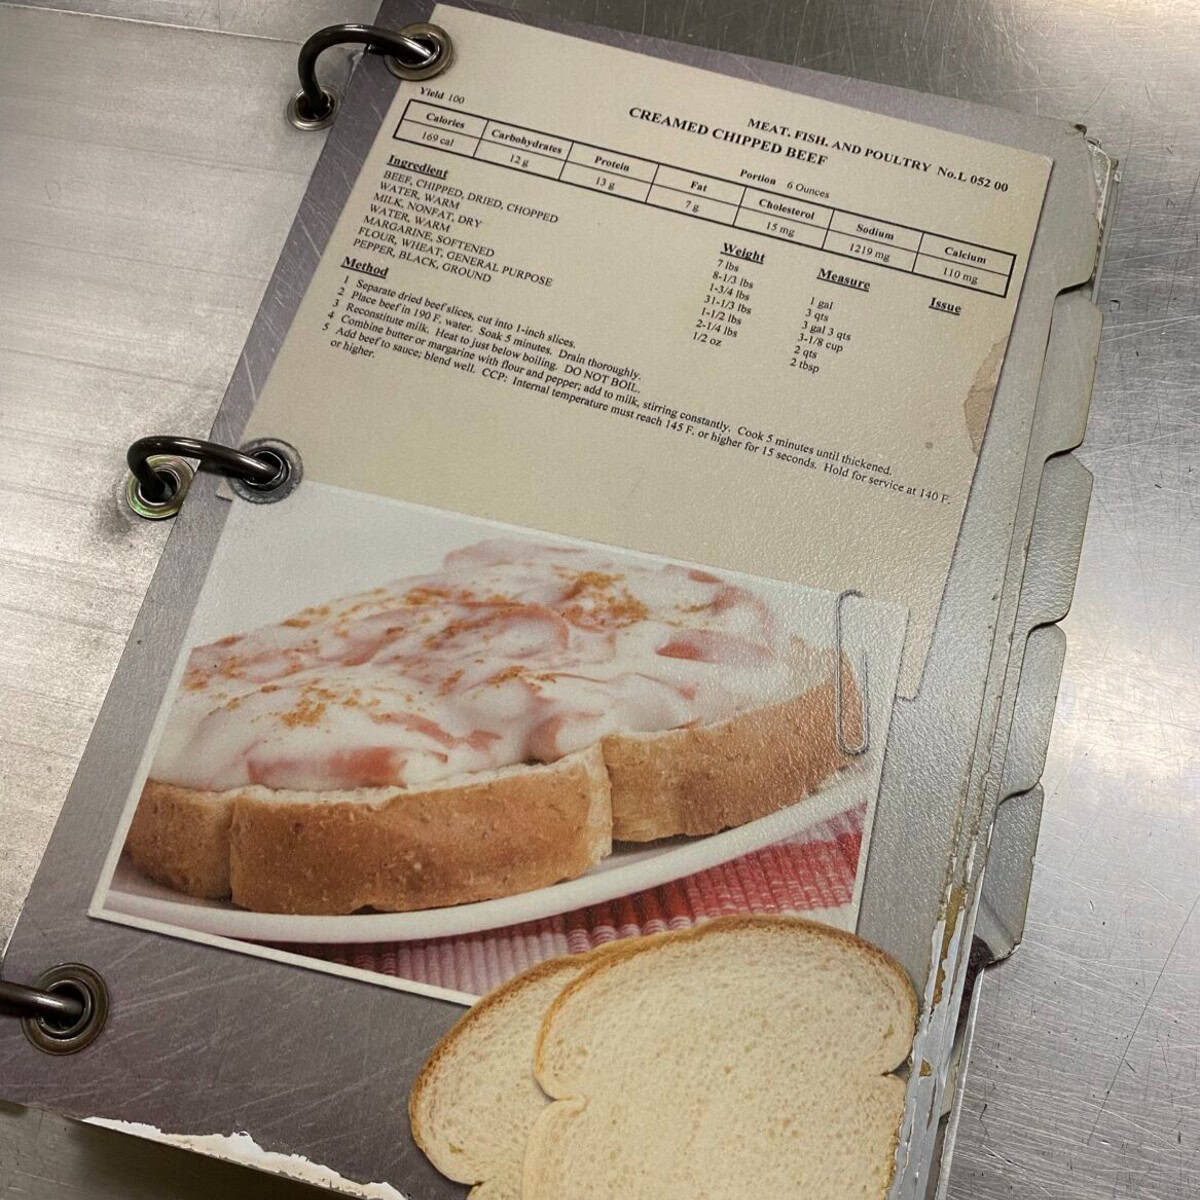 a recipe for "CREAMED CHIPPED BEEF" on the cover. The nutritional information for the recipe is listed at the top. Ingredients are listed on the left and instructions are listed on the right.